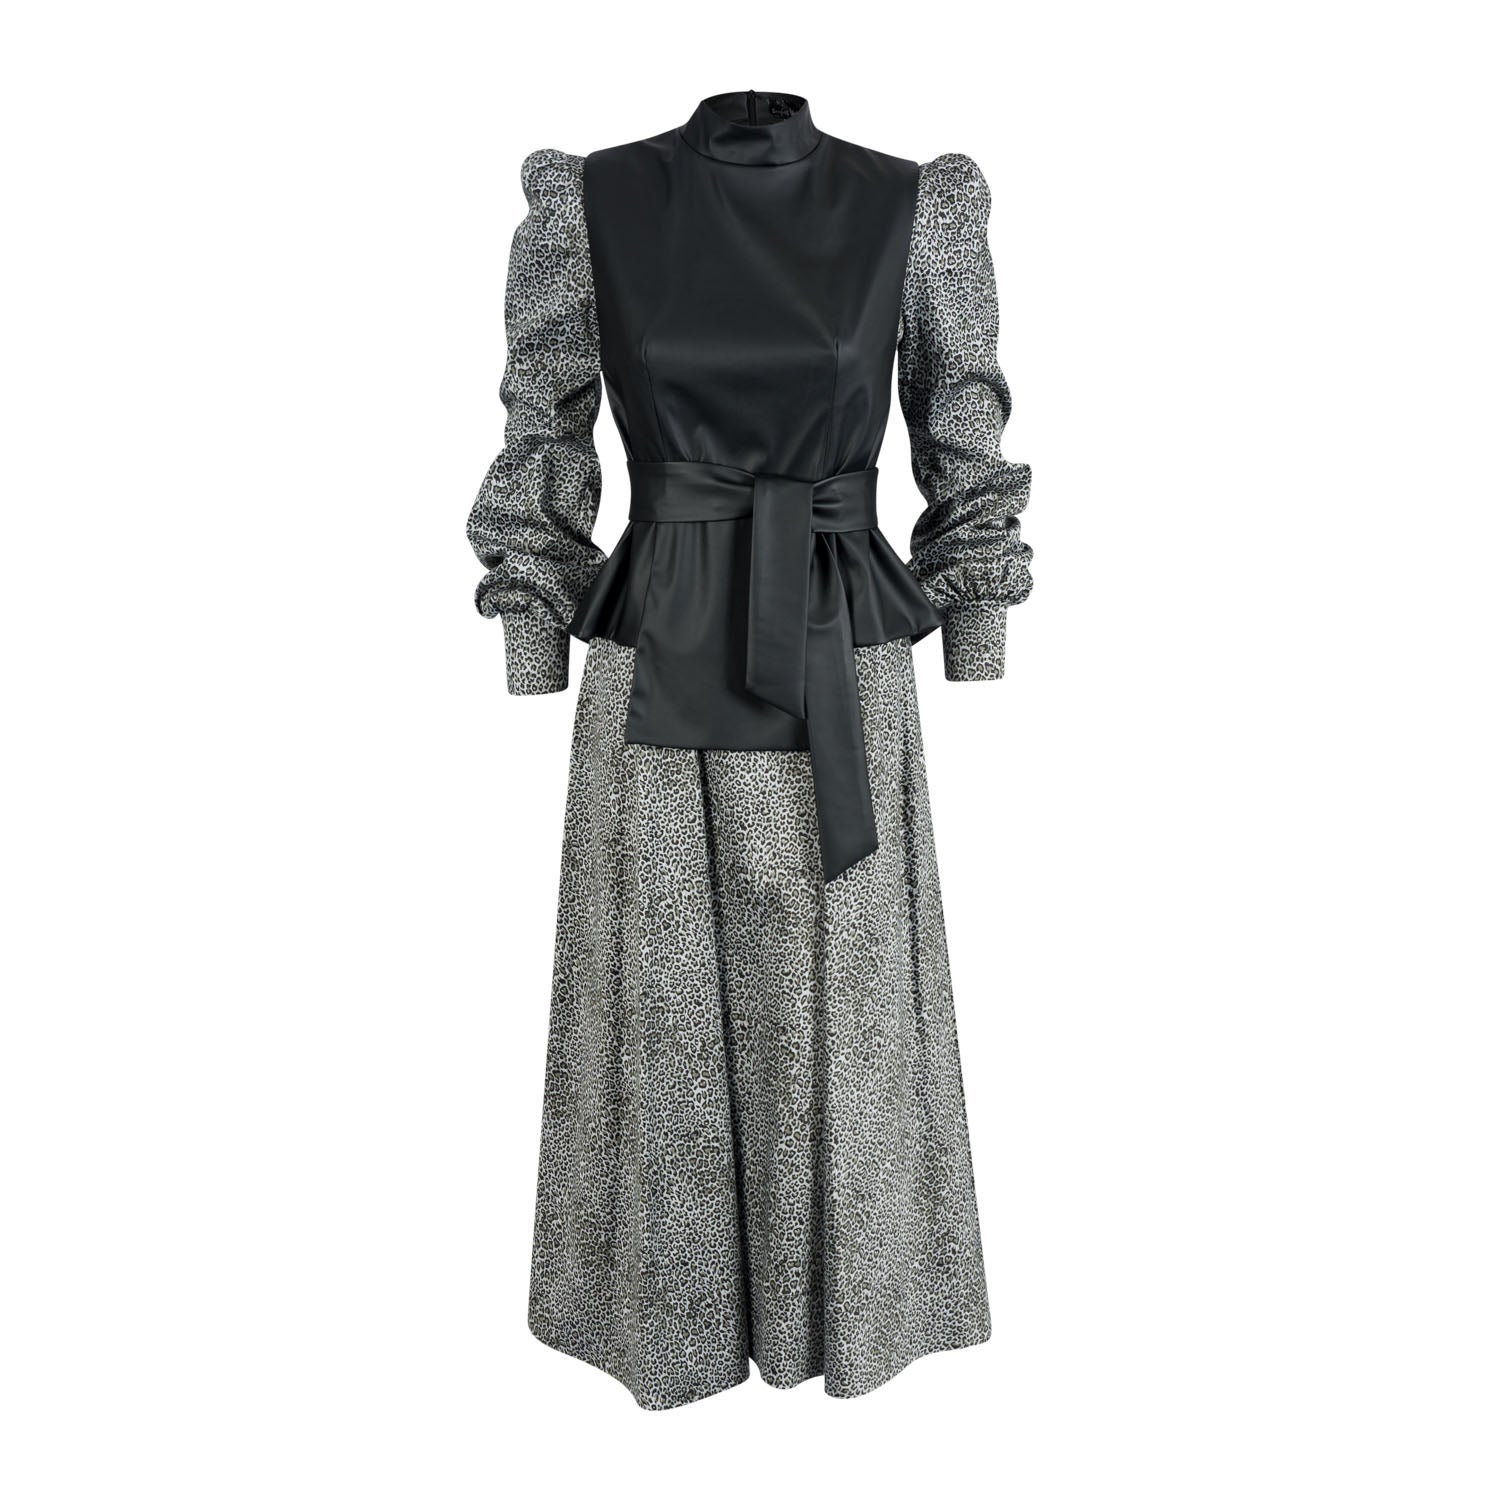 Kwindlakazi Classic A-Line Belted Dress: Grey animal print A-line dress with turtleneck, belted waist, and fit-and-flare silhouette.